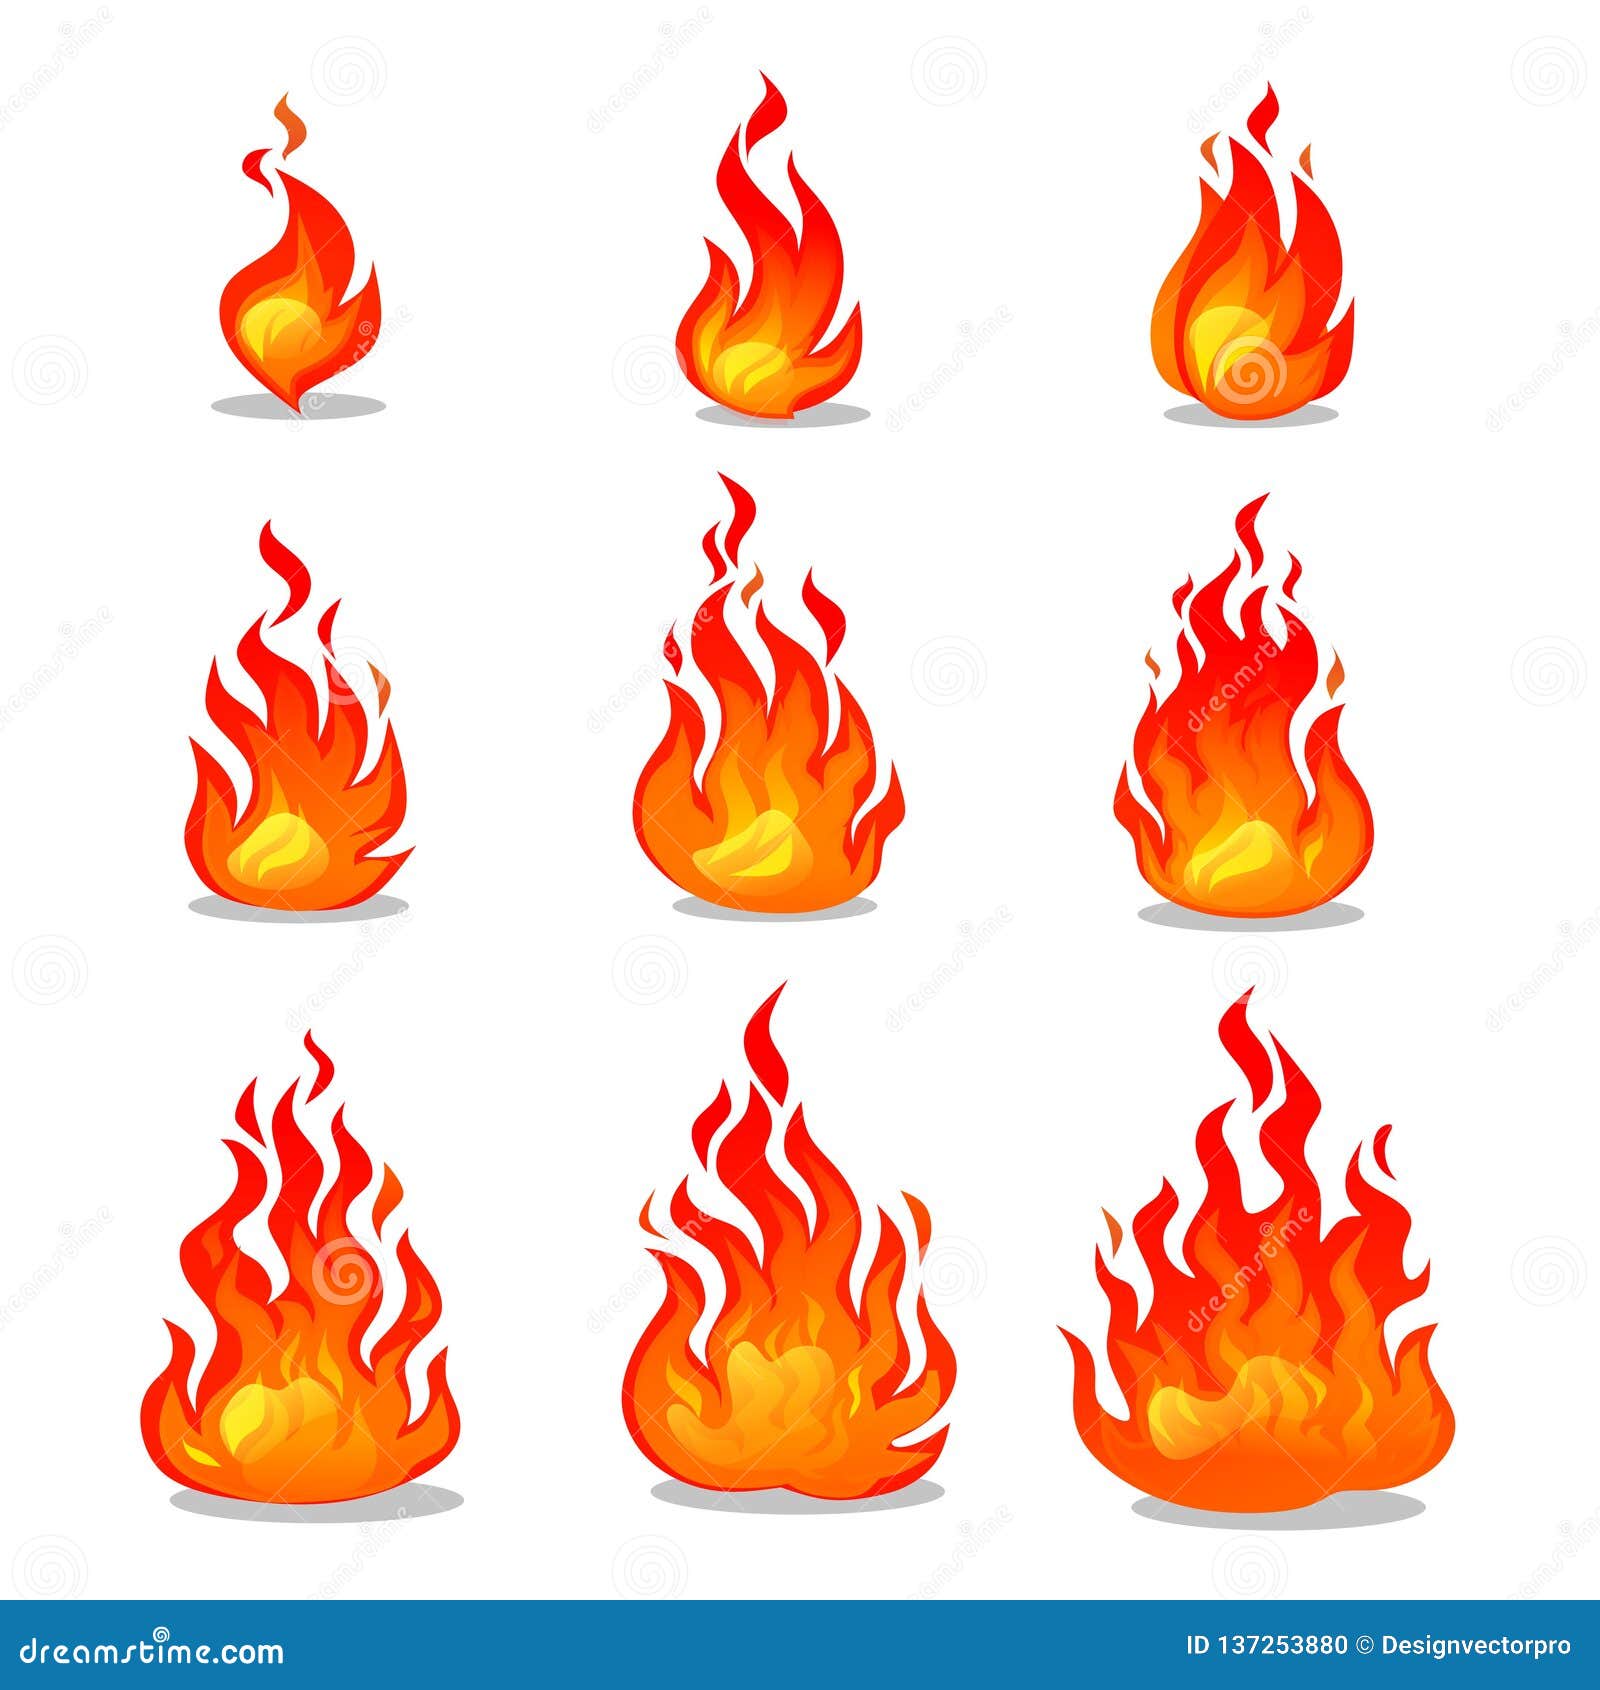 Cartoon Fire Animation Design on White Background. Vector Fireplace  Illustration for Animation, Games Etc Stock Vector - Illustration of heat,  firewood: 137253880